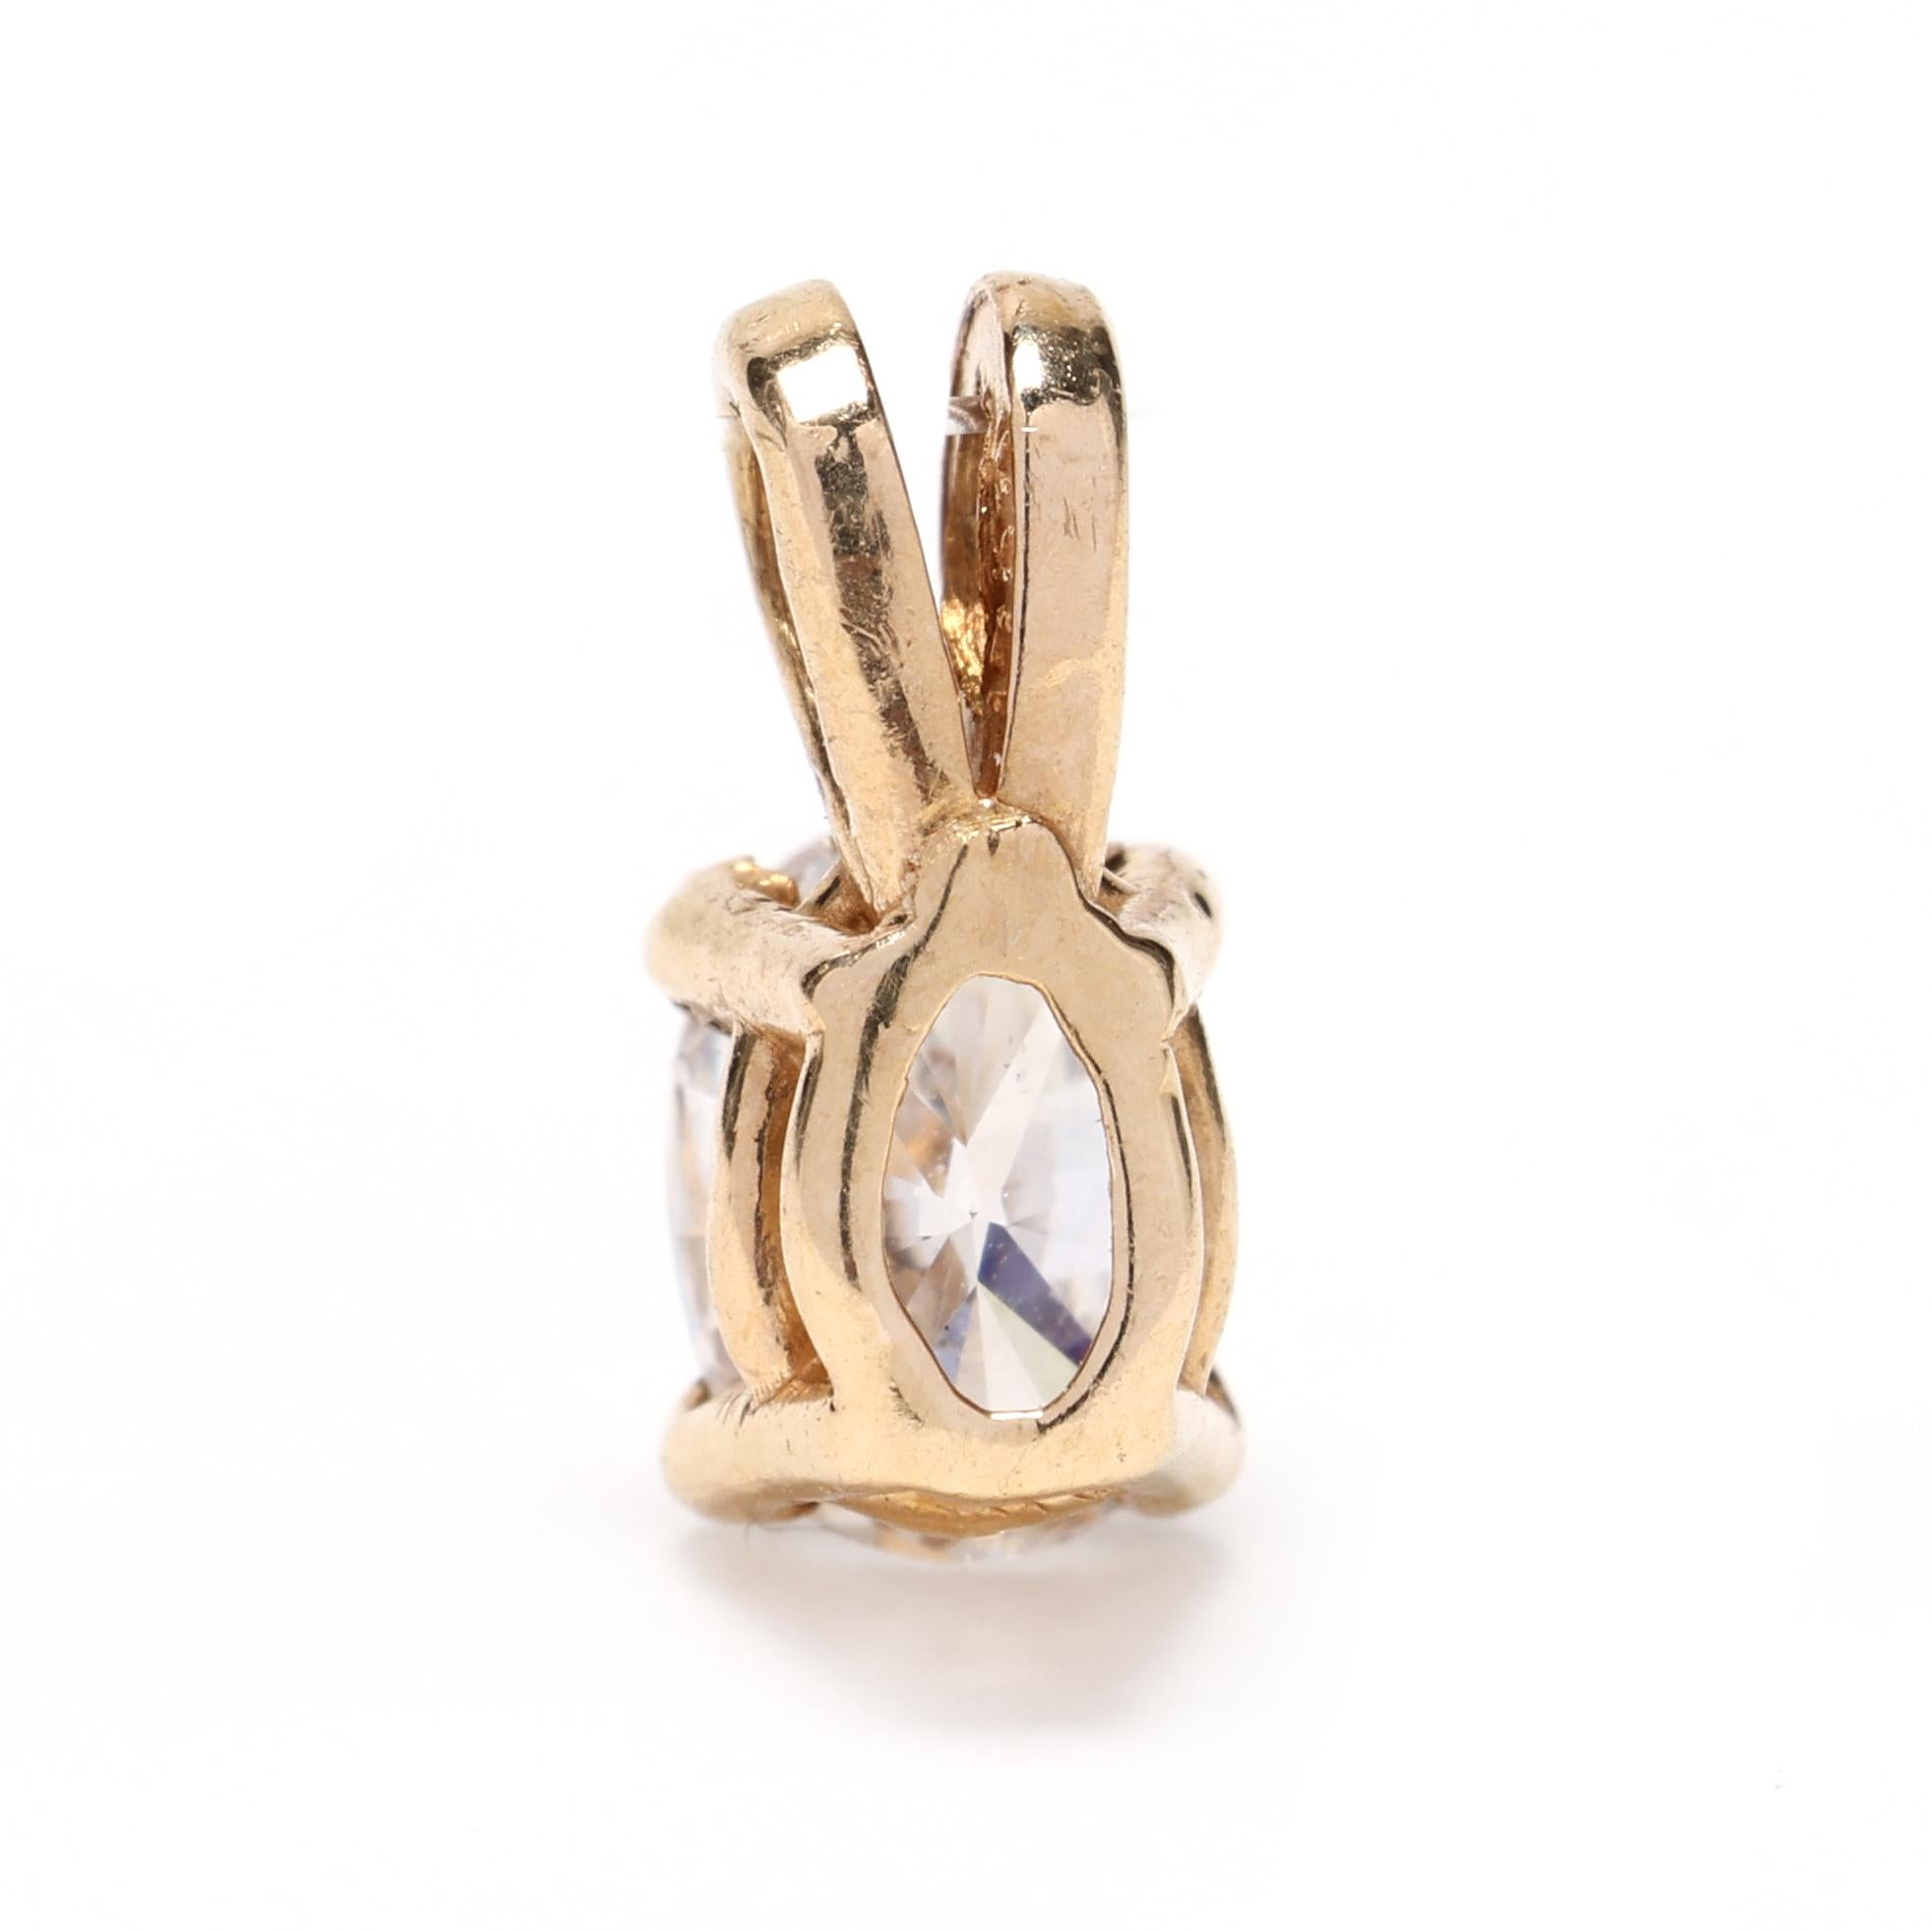 This elegant and dainty charm pendant features a 0.20 carat diamond set in 14k yellow gold, creating a beautiful and timeless piece of jewelry. The sparkle of the diamond adds a touch of luxury and sophistication to any outfit, making it a versatile